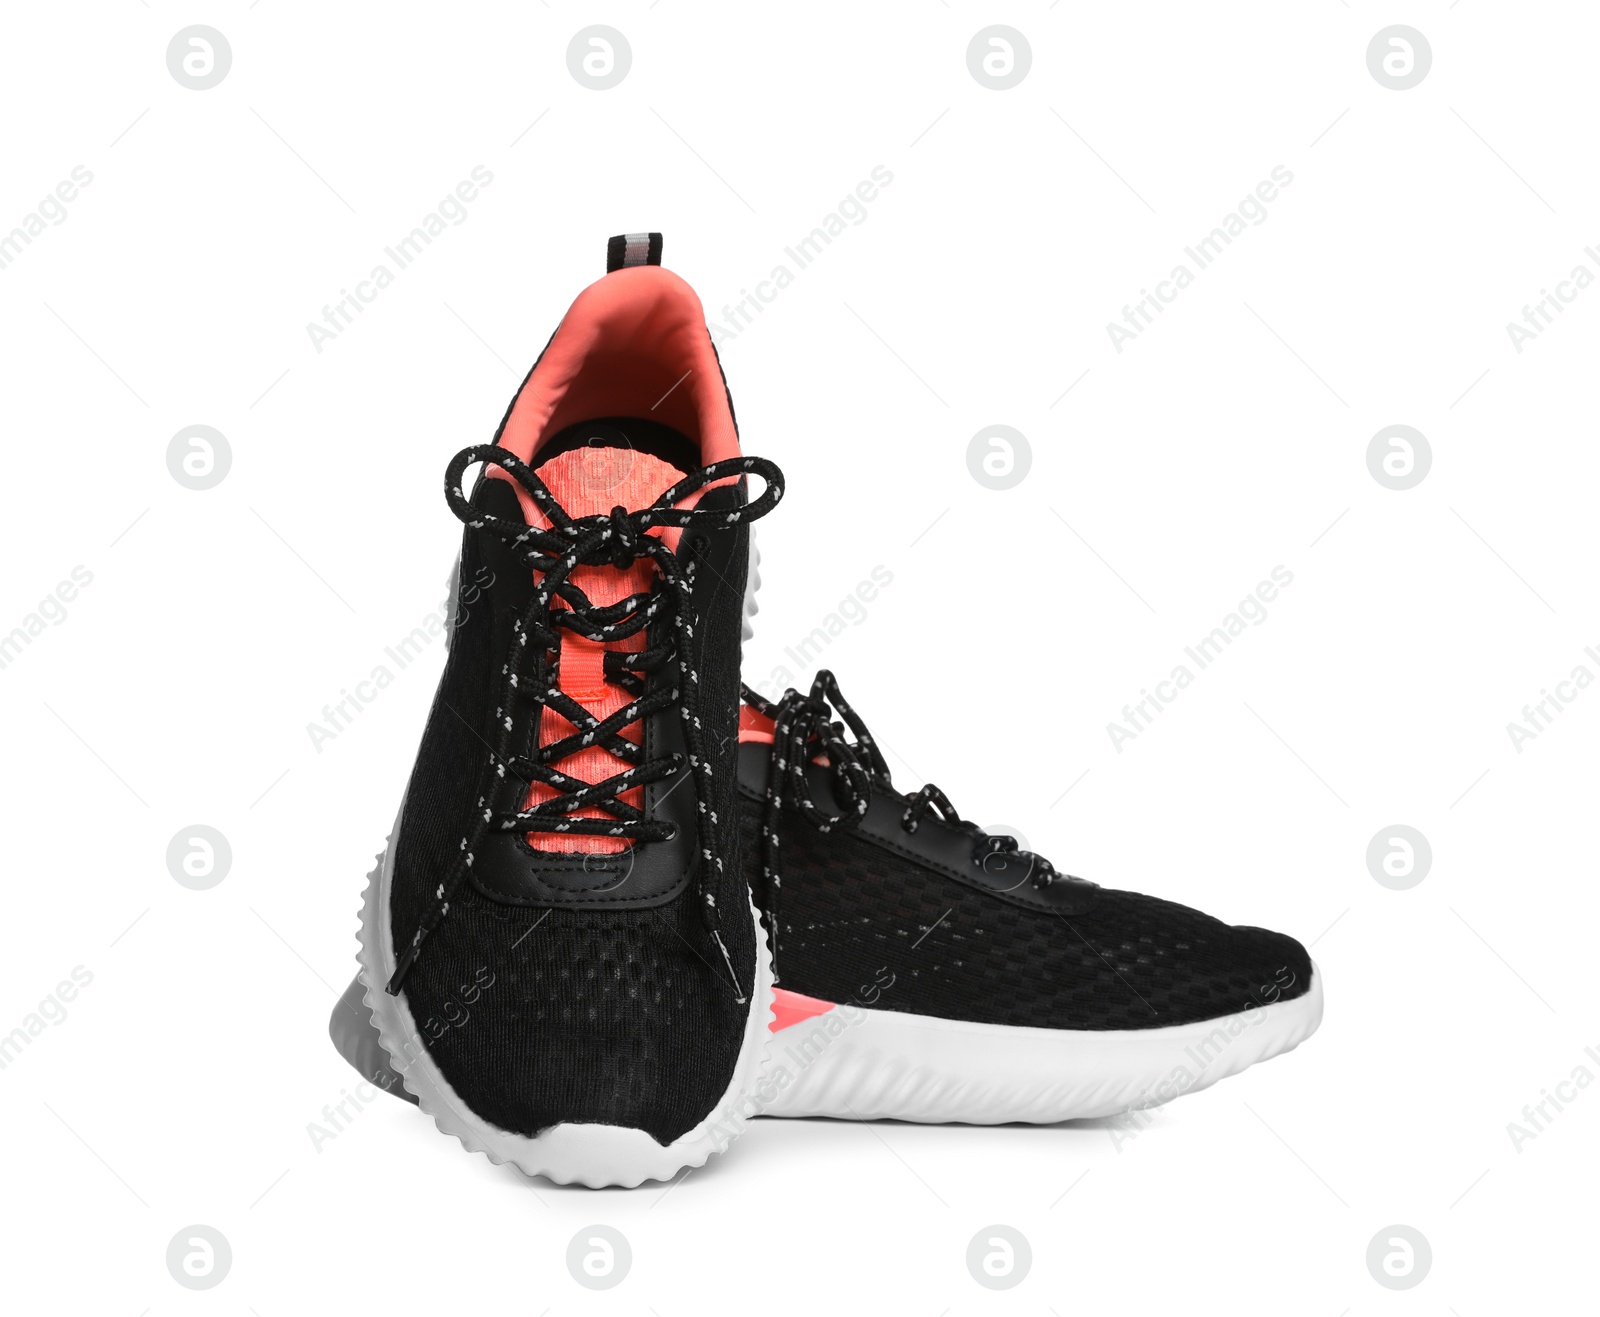 Photo of Pair of stylish sport shoes on white background